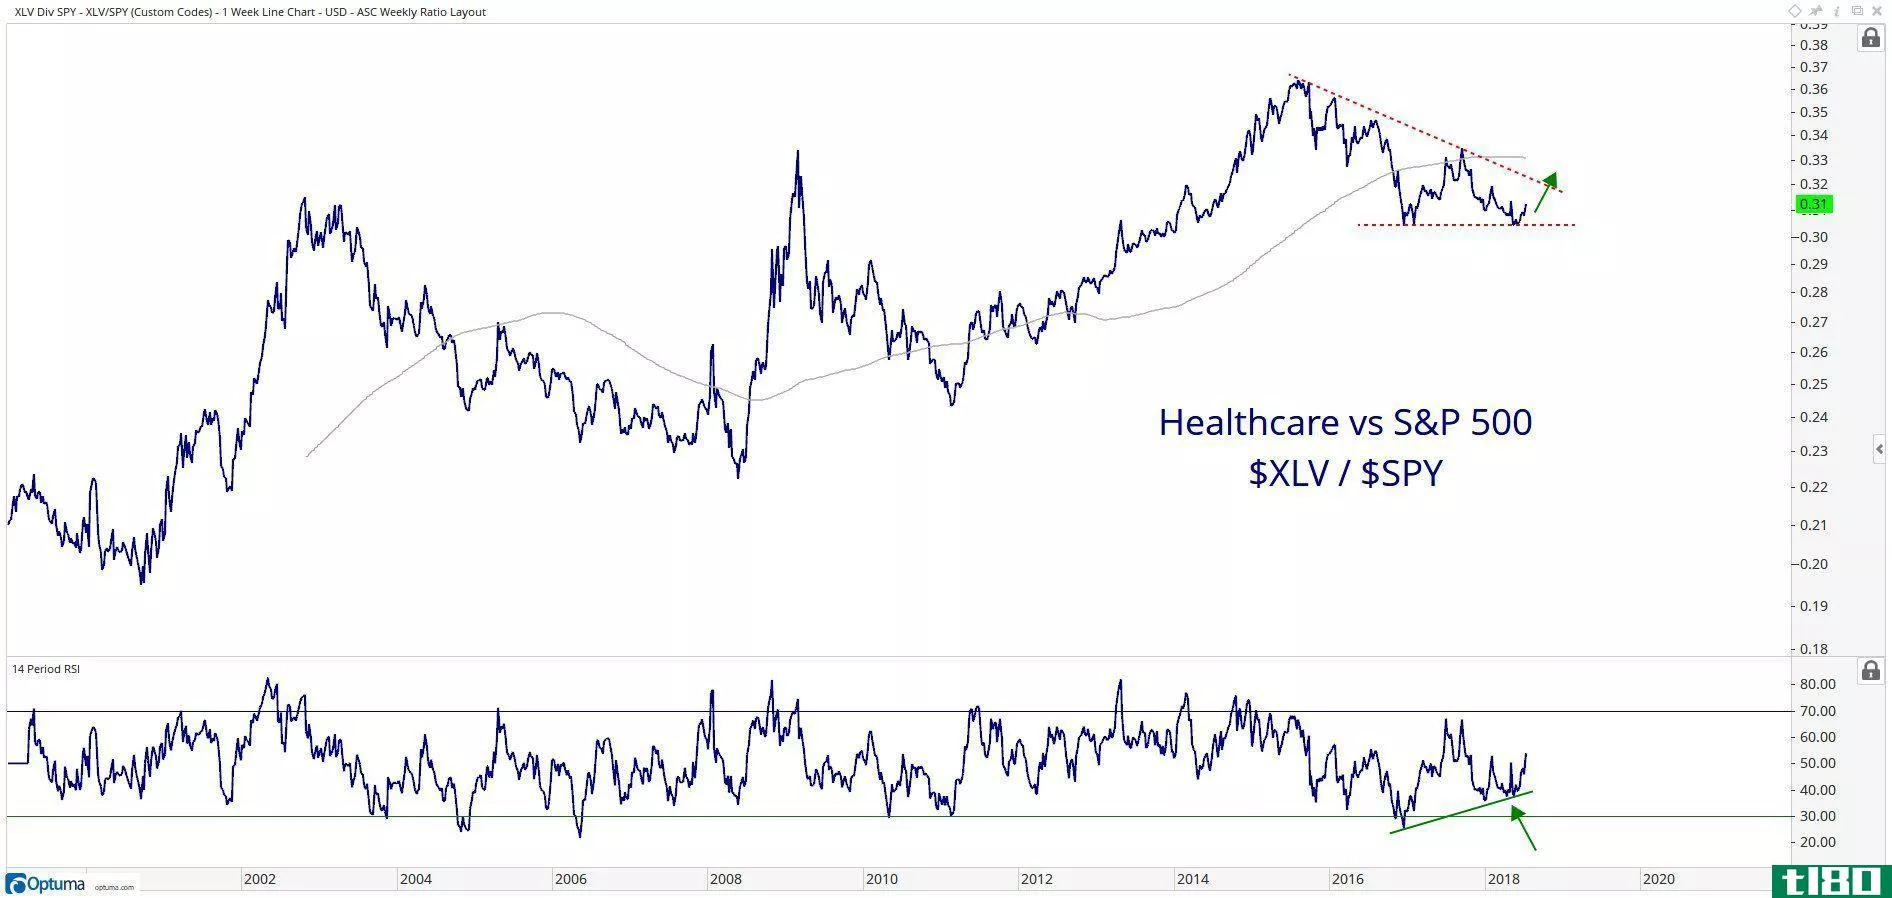 Chart showing performance of Health Care Select Sector SPDR ETF (XLV) vs. SPDR S&P 500 ETF (SPY)